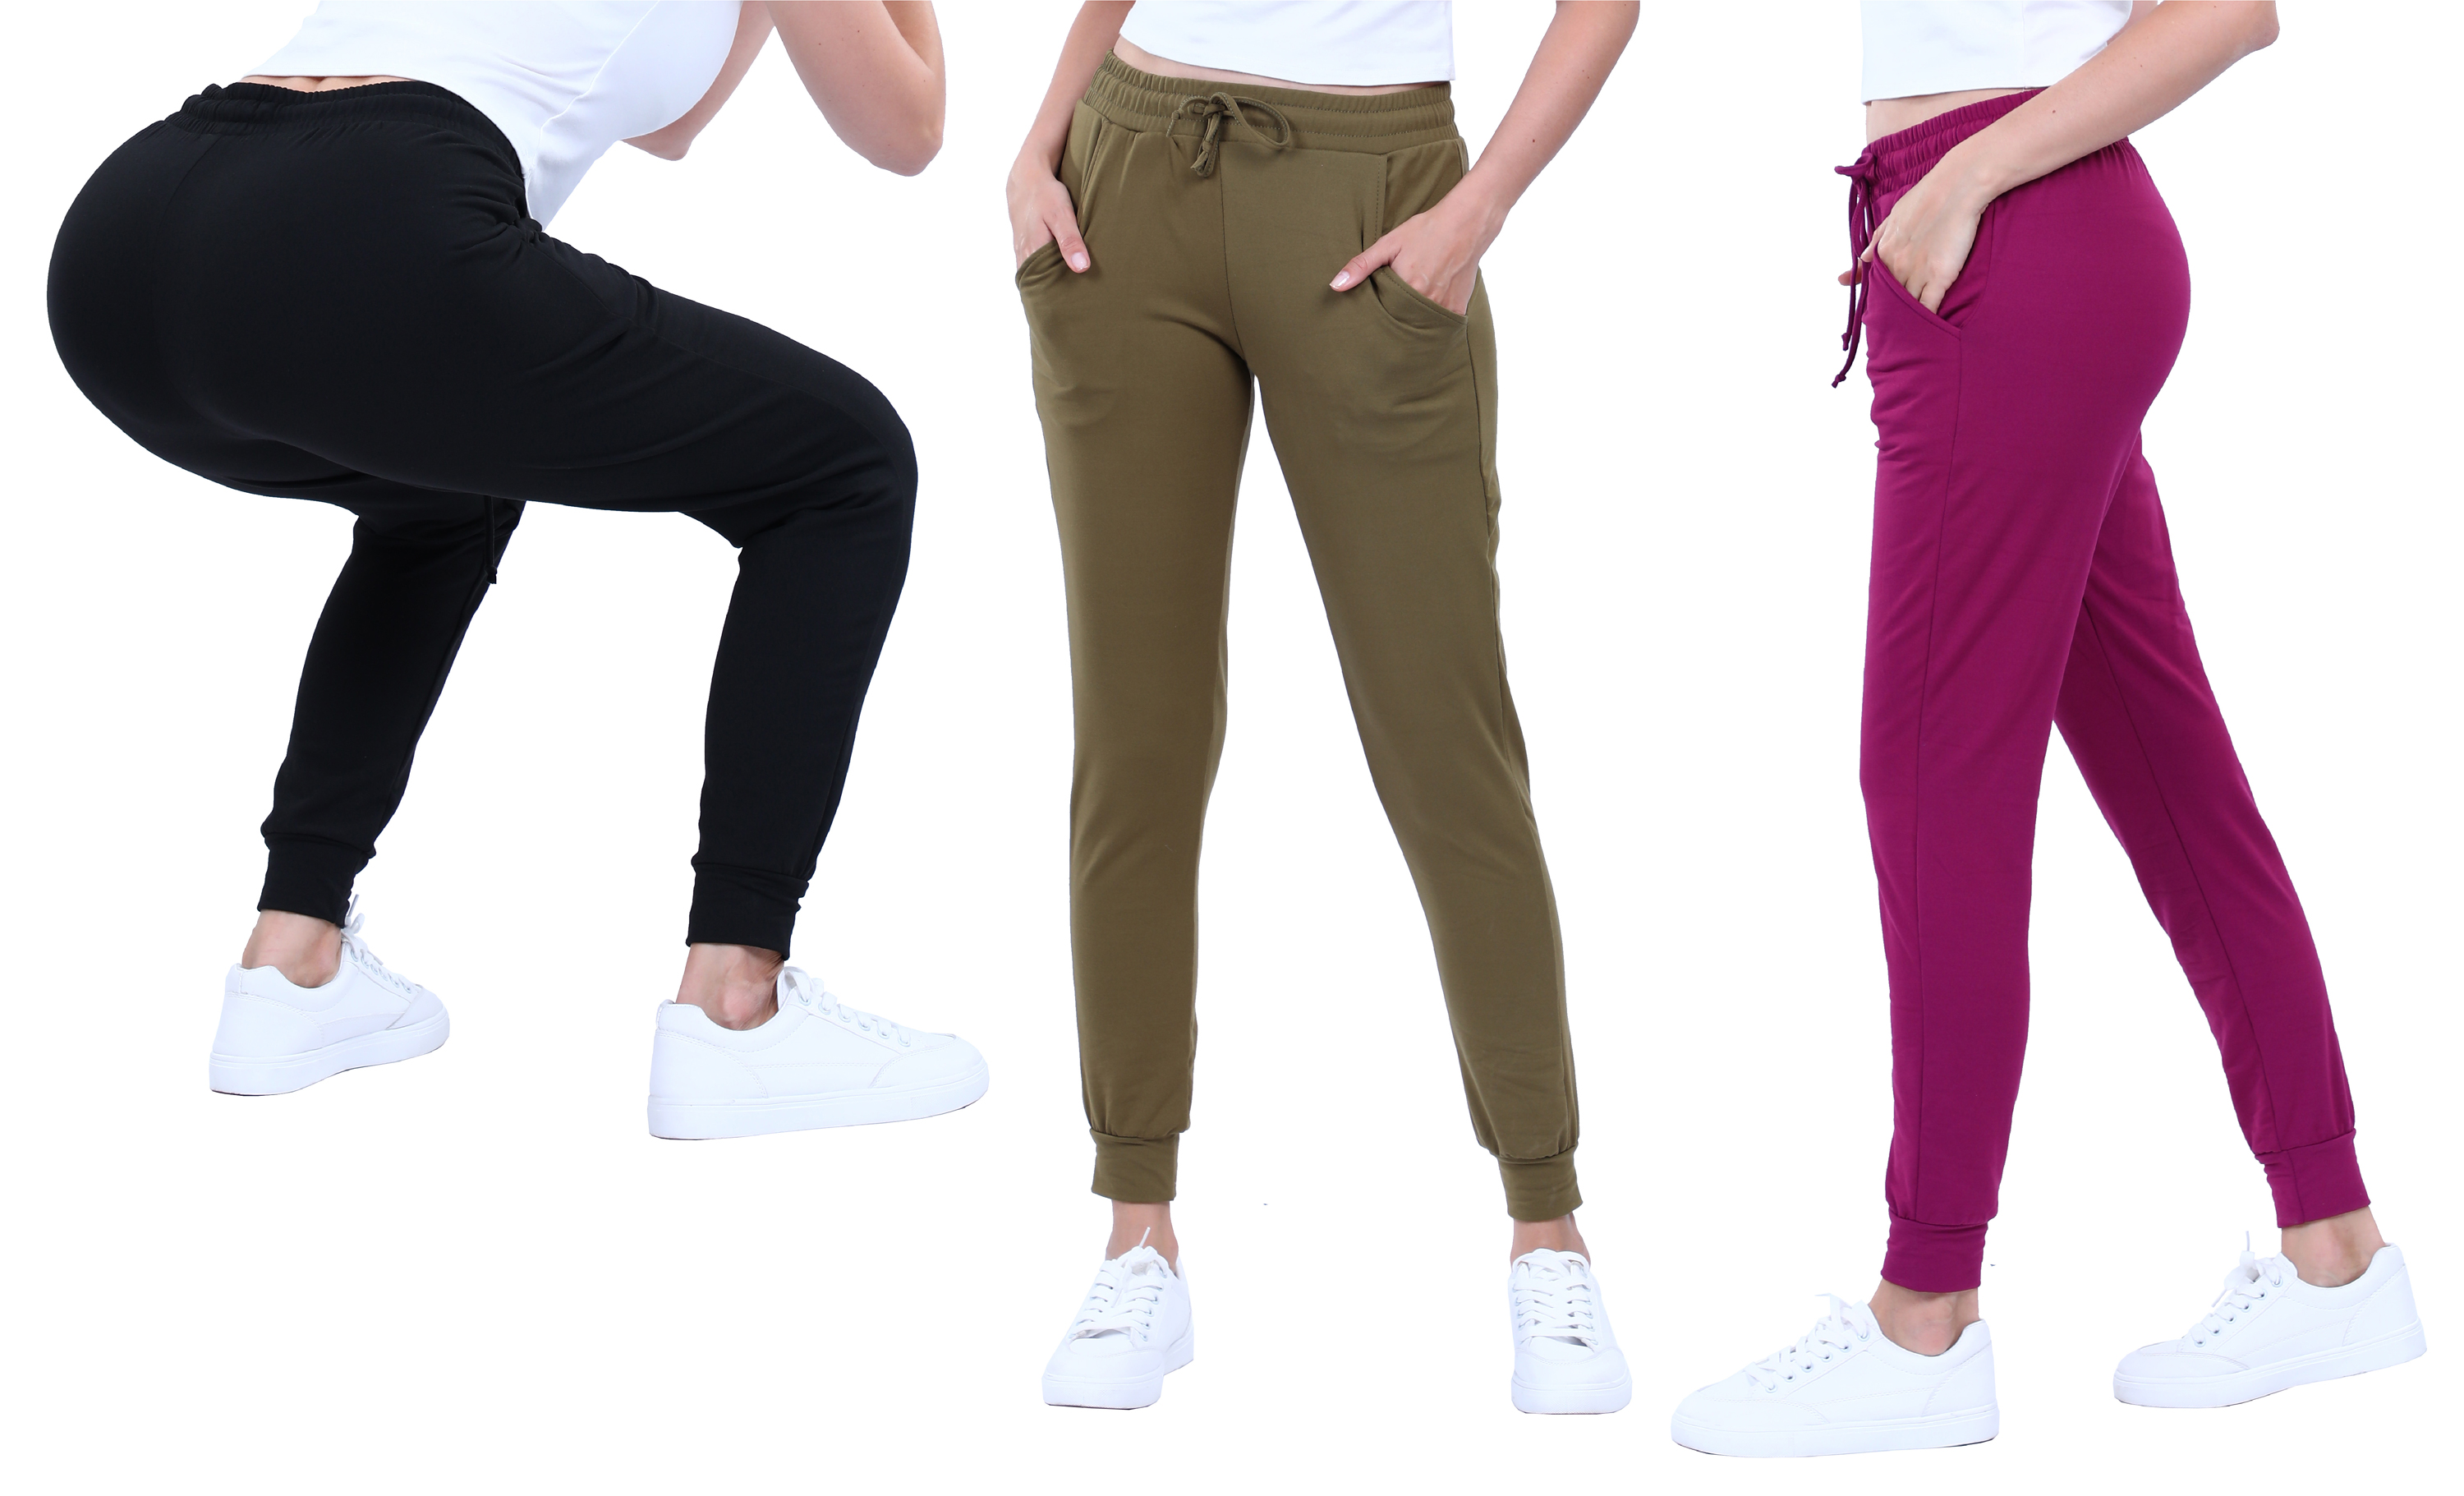 S/M, L/XL Indero Womens Soft Fleece Joggers Relaxed Fit Sweatpants with Pockets Winter Christmas Holiday 